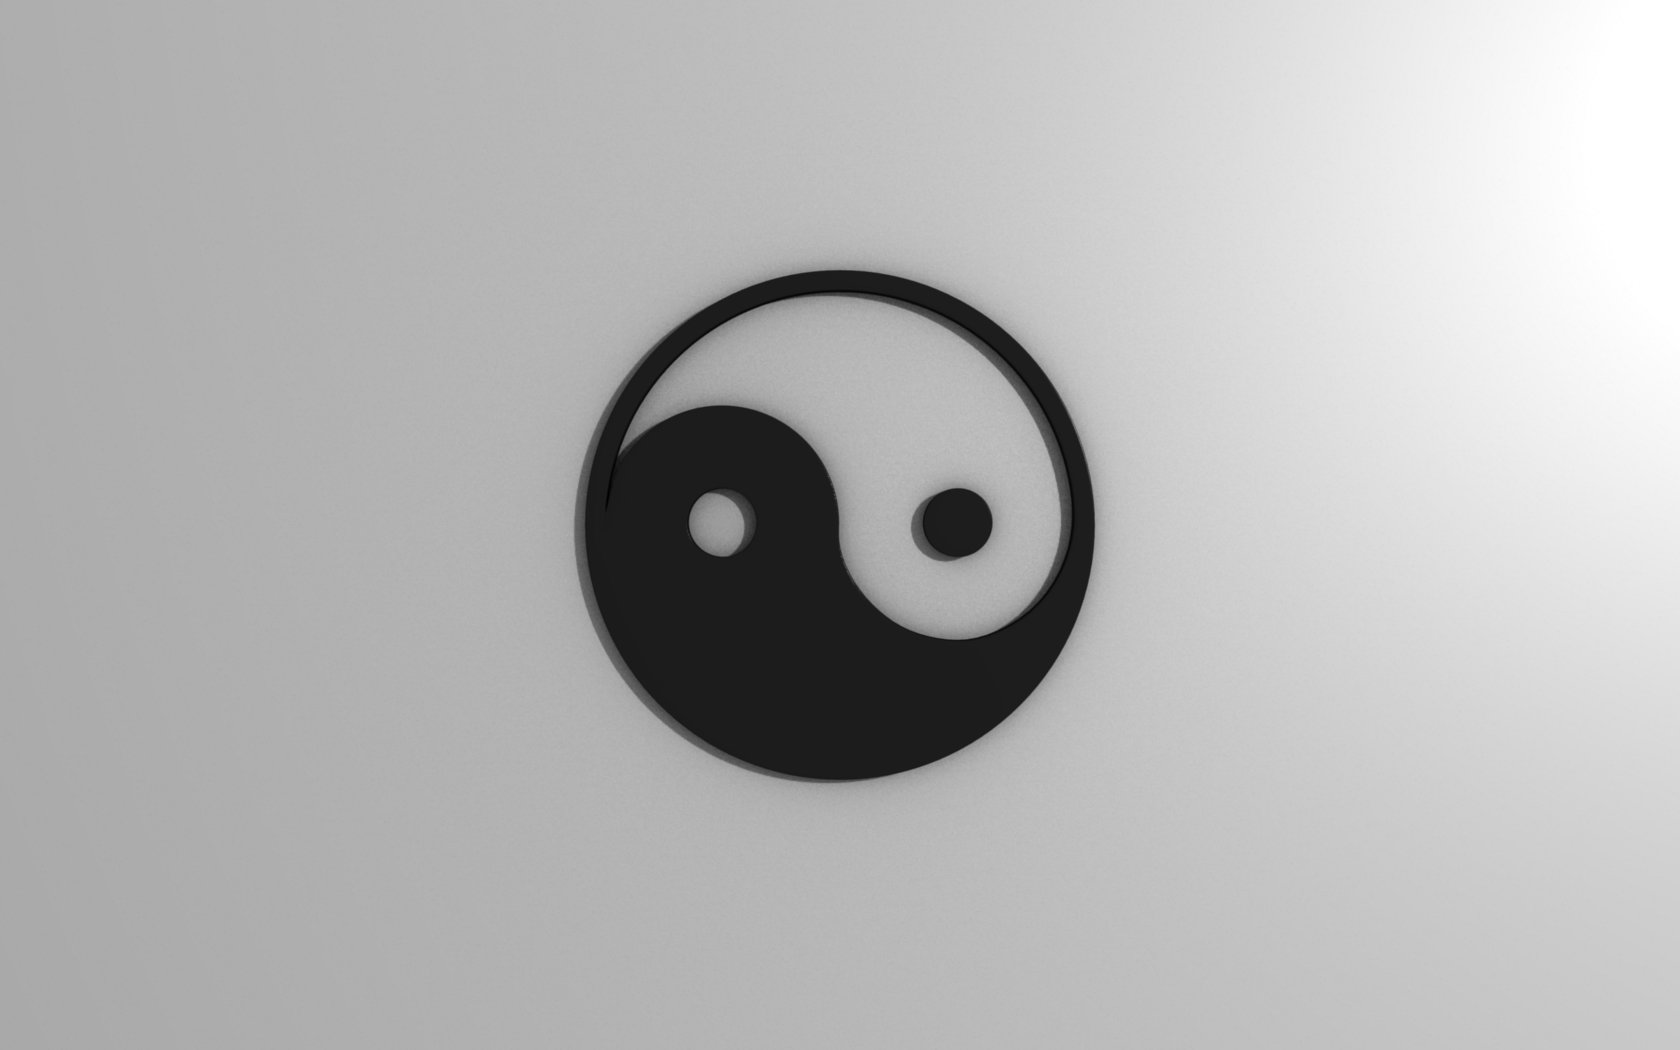 Yin Yang Wallpaper Images Pictures   Becuo